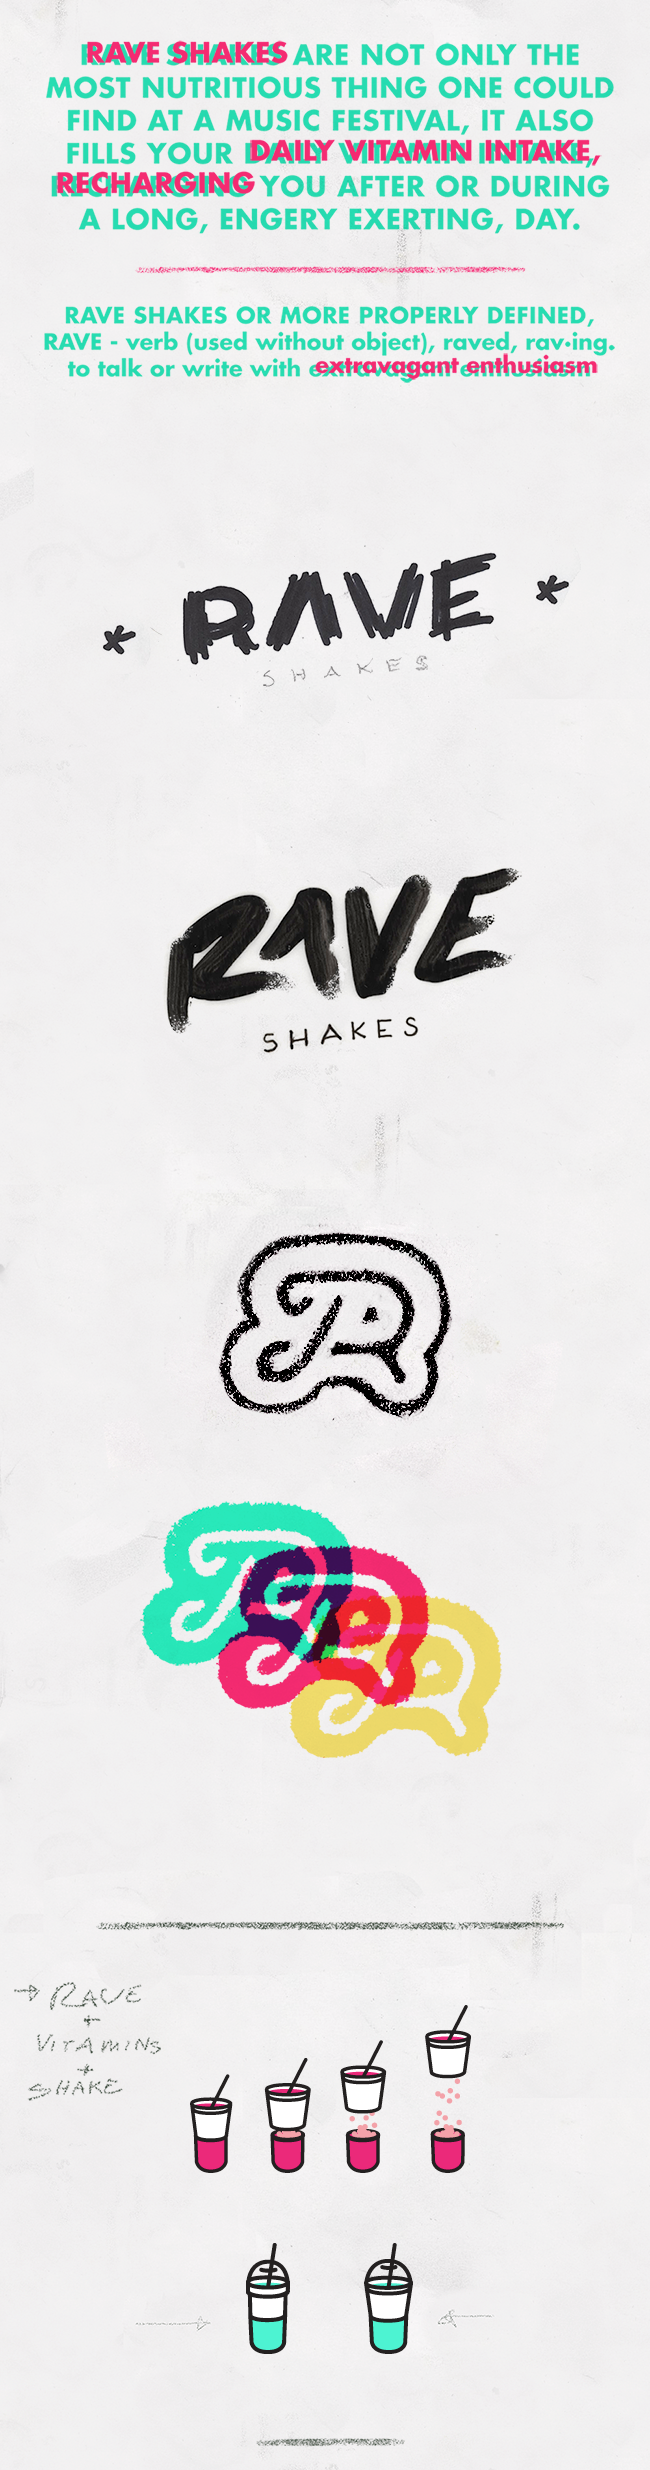 rave shakes smoothies brainstorming healthy